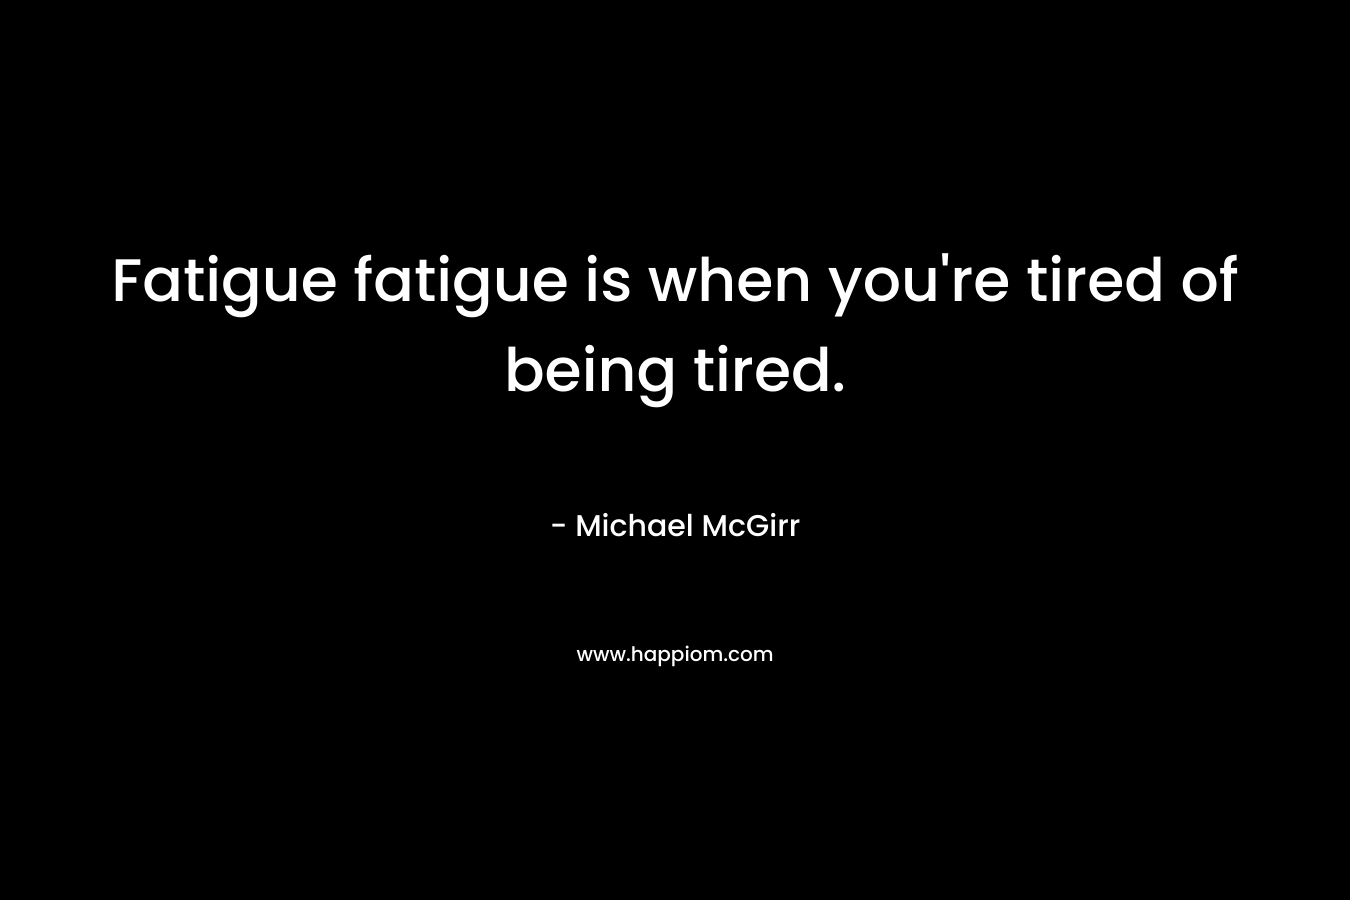 Fatigue fatigue is when you're tired of being tired.